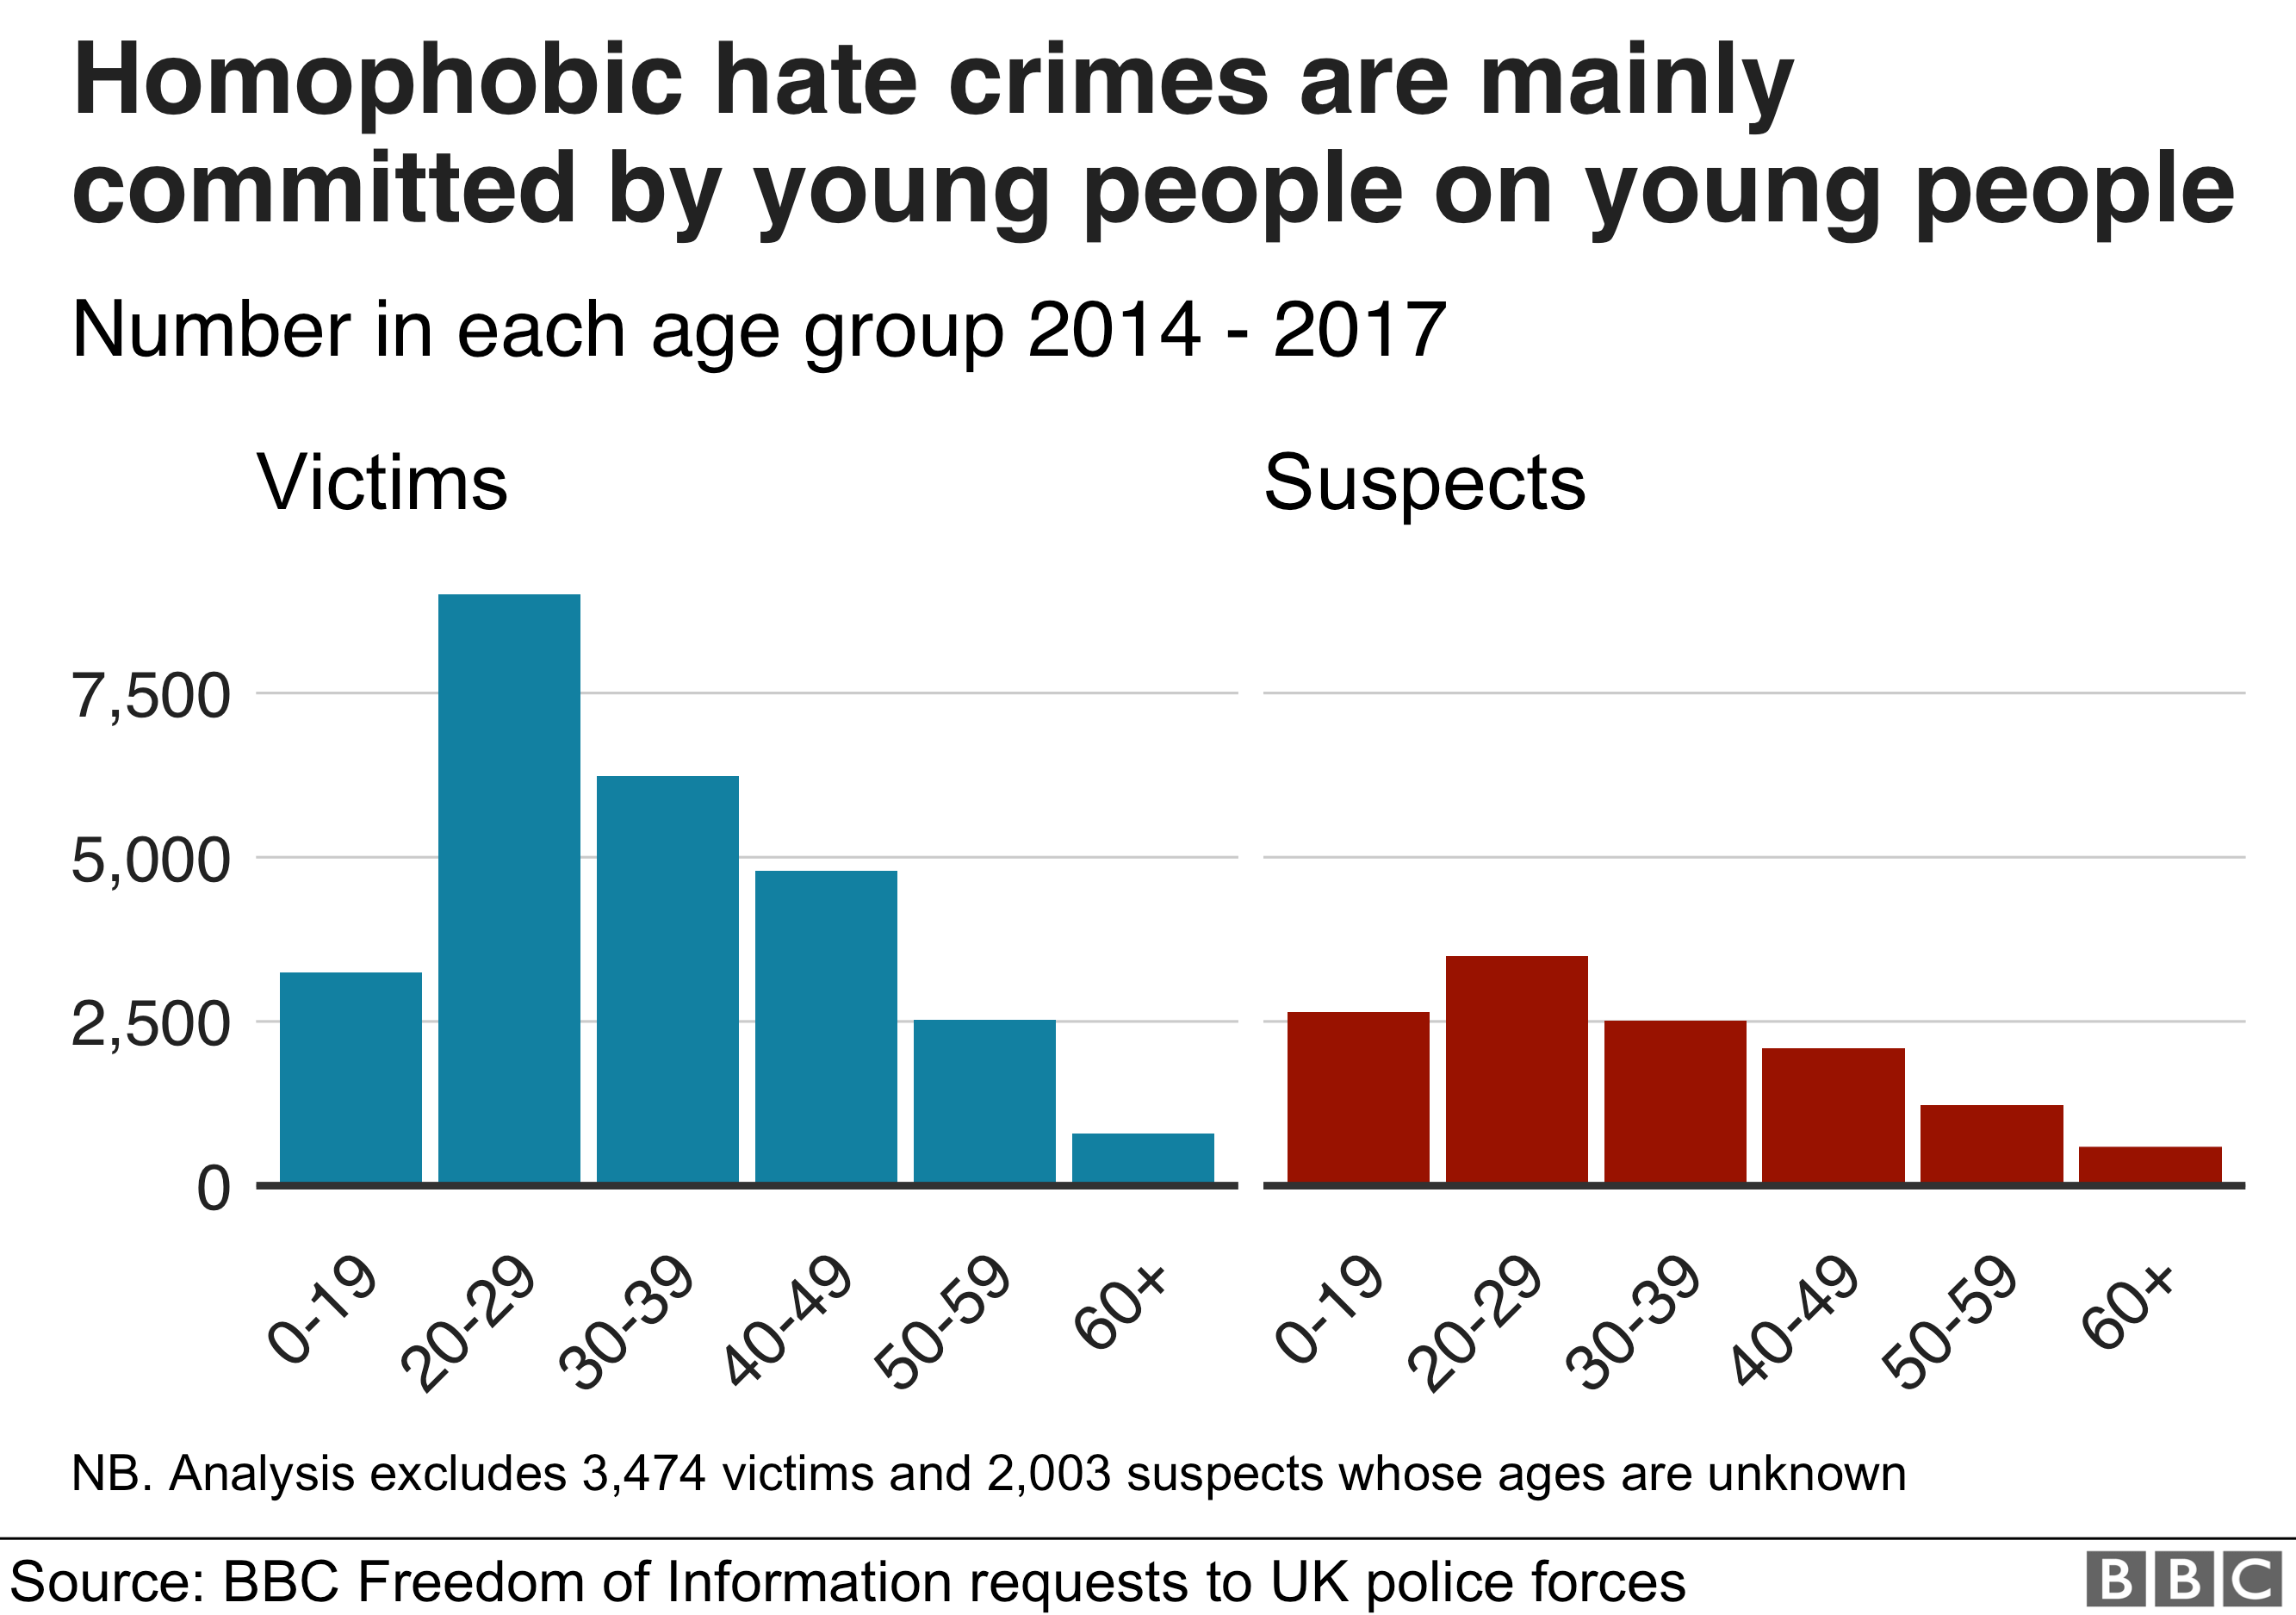 How LGBTQ+ hate crime is committed by young people against young people